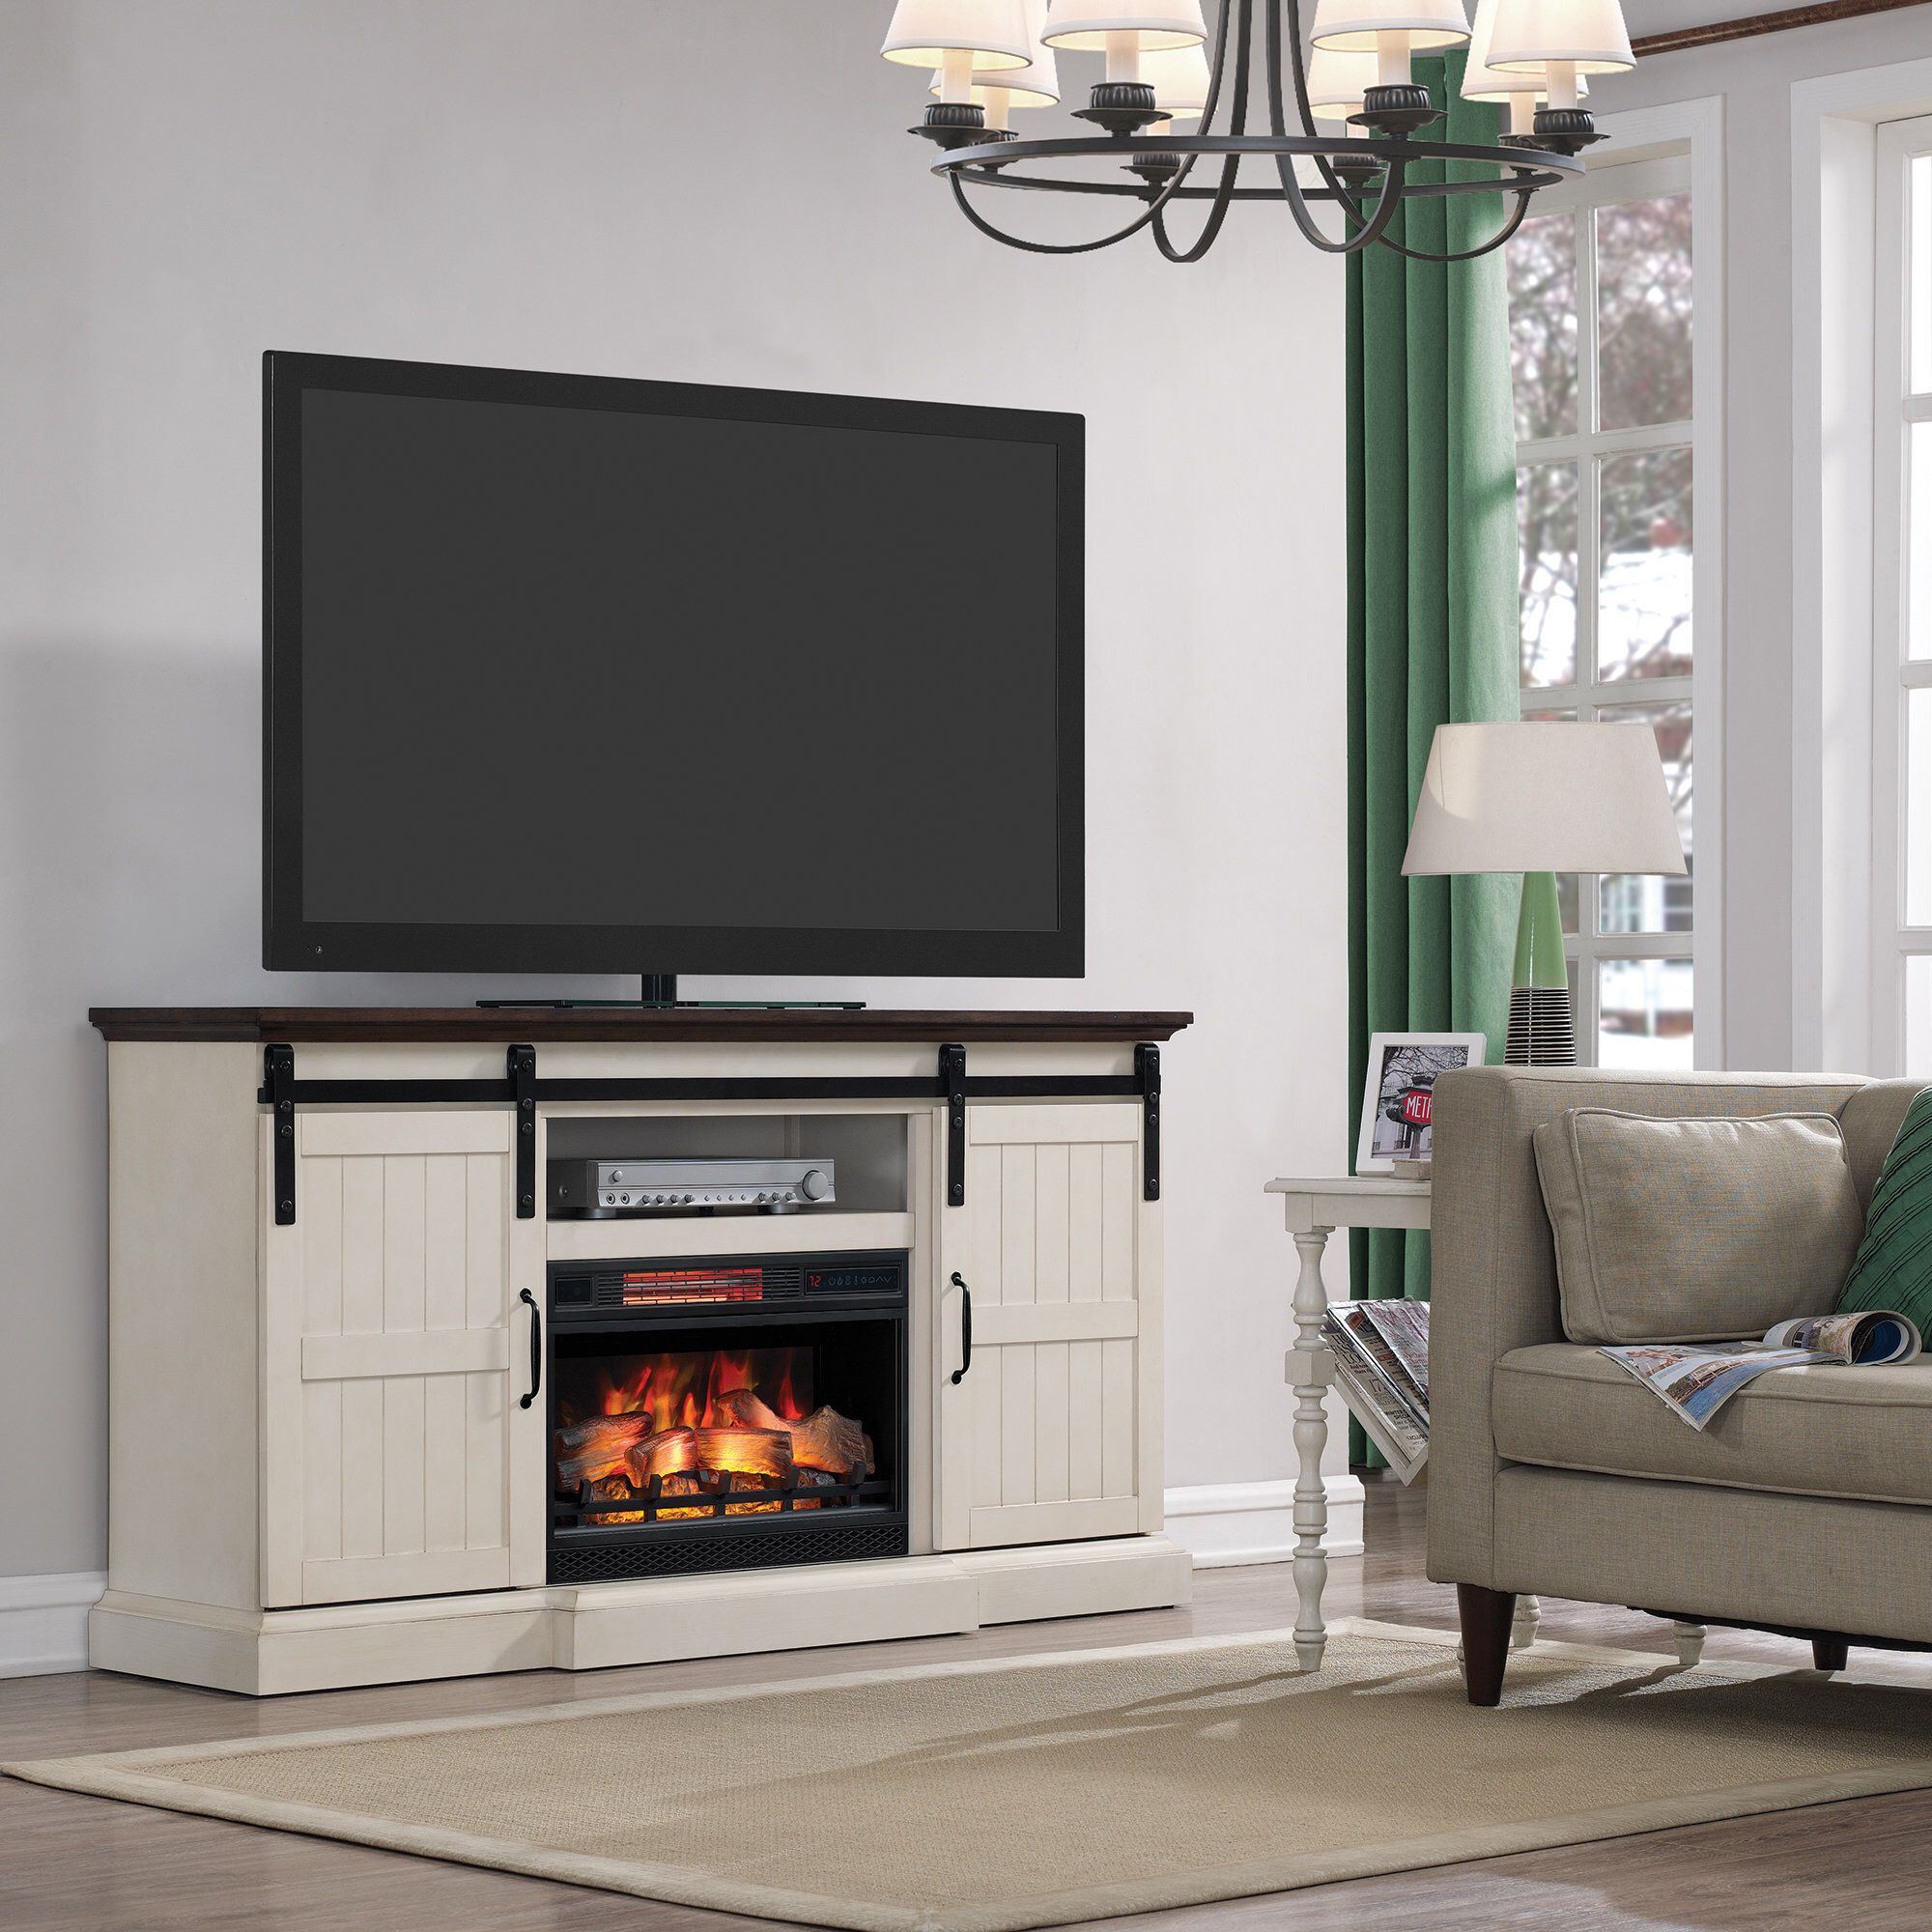 Cheap Fireplace Tv Stand Unique Glendora 66 5" Tv Stand with Electric Fireplace